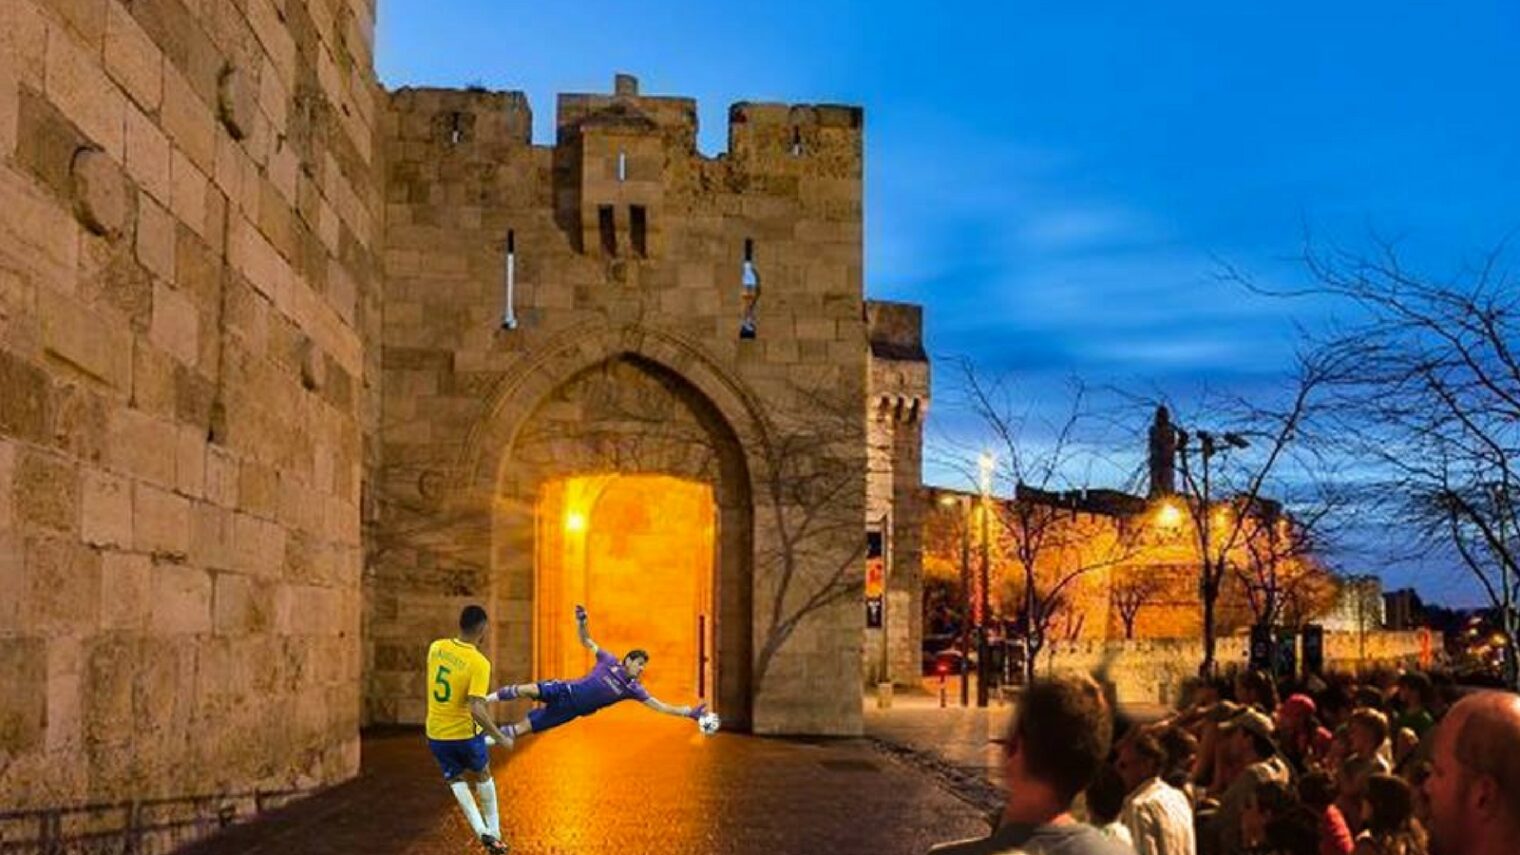 A photoshopped image of the upcoming penalty shootout at the Old Cityâ€™s Jaffa Gate during the World Cup. Photo via Facebook